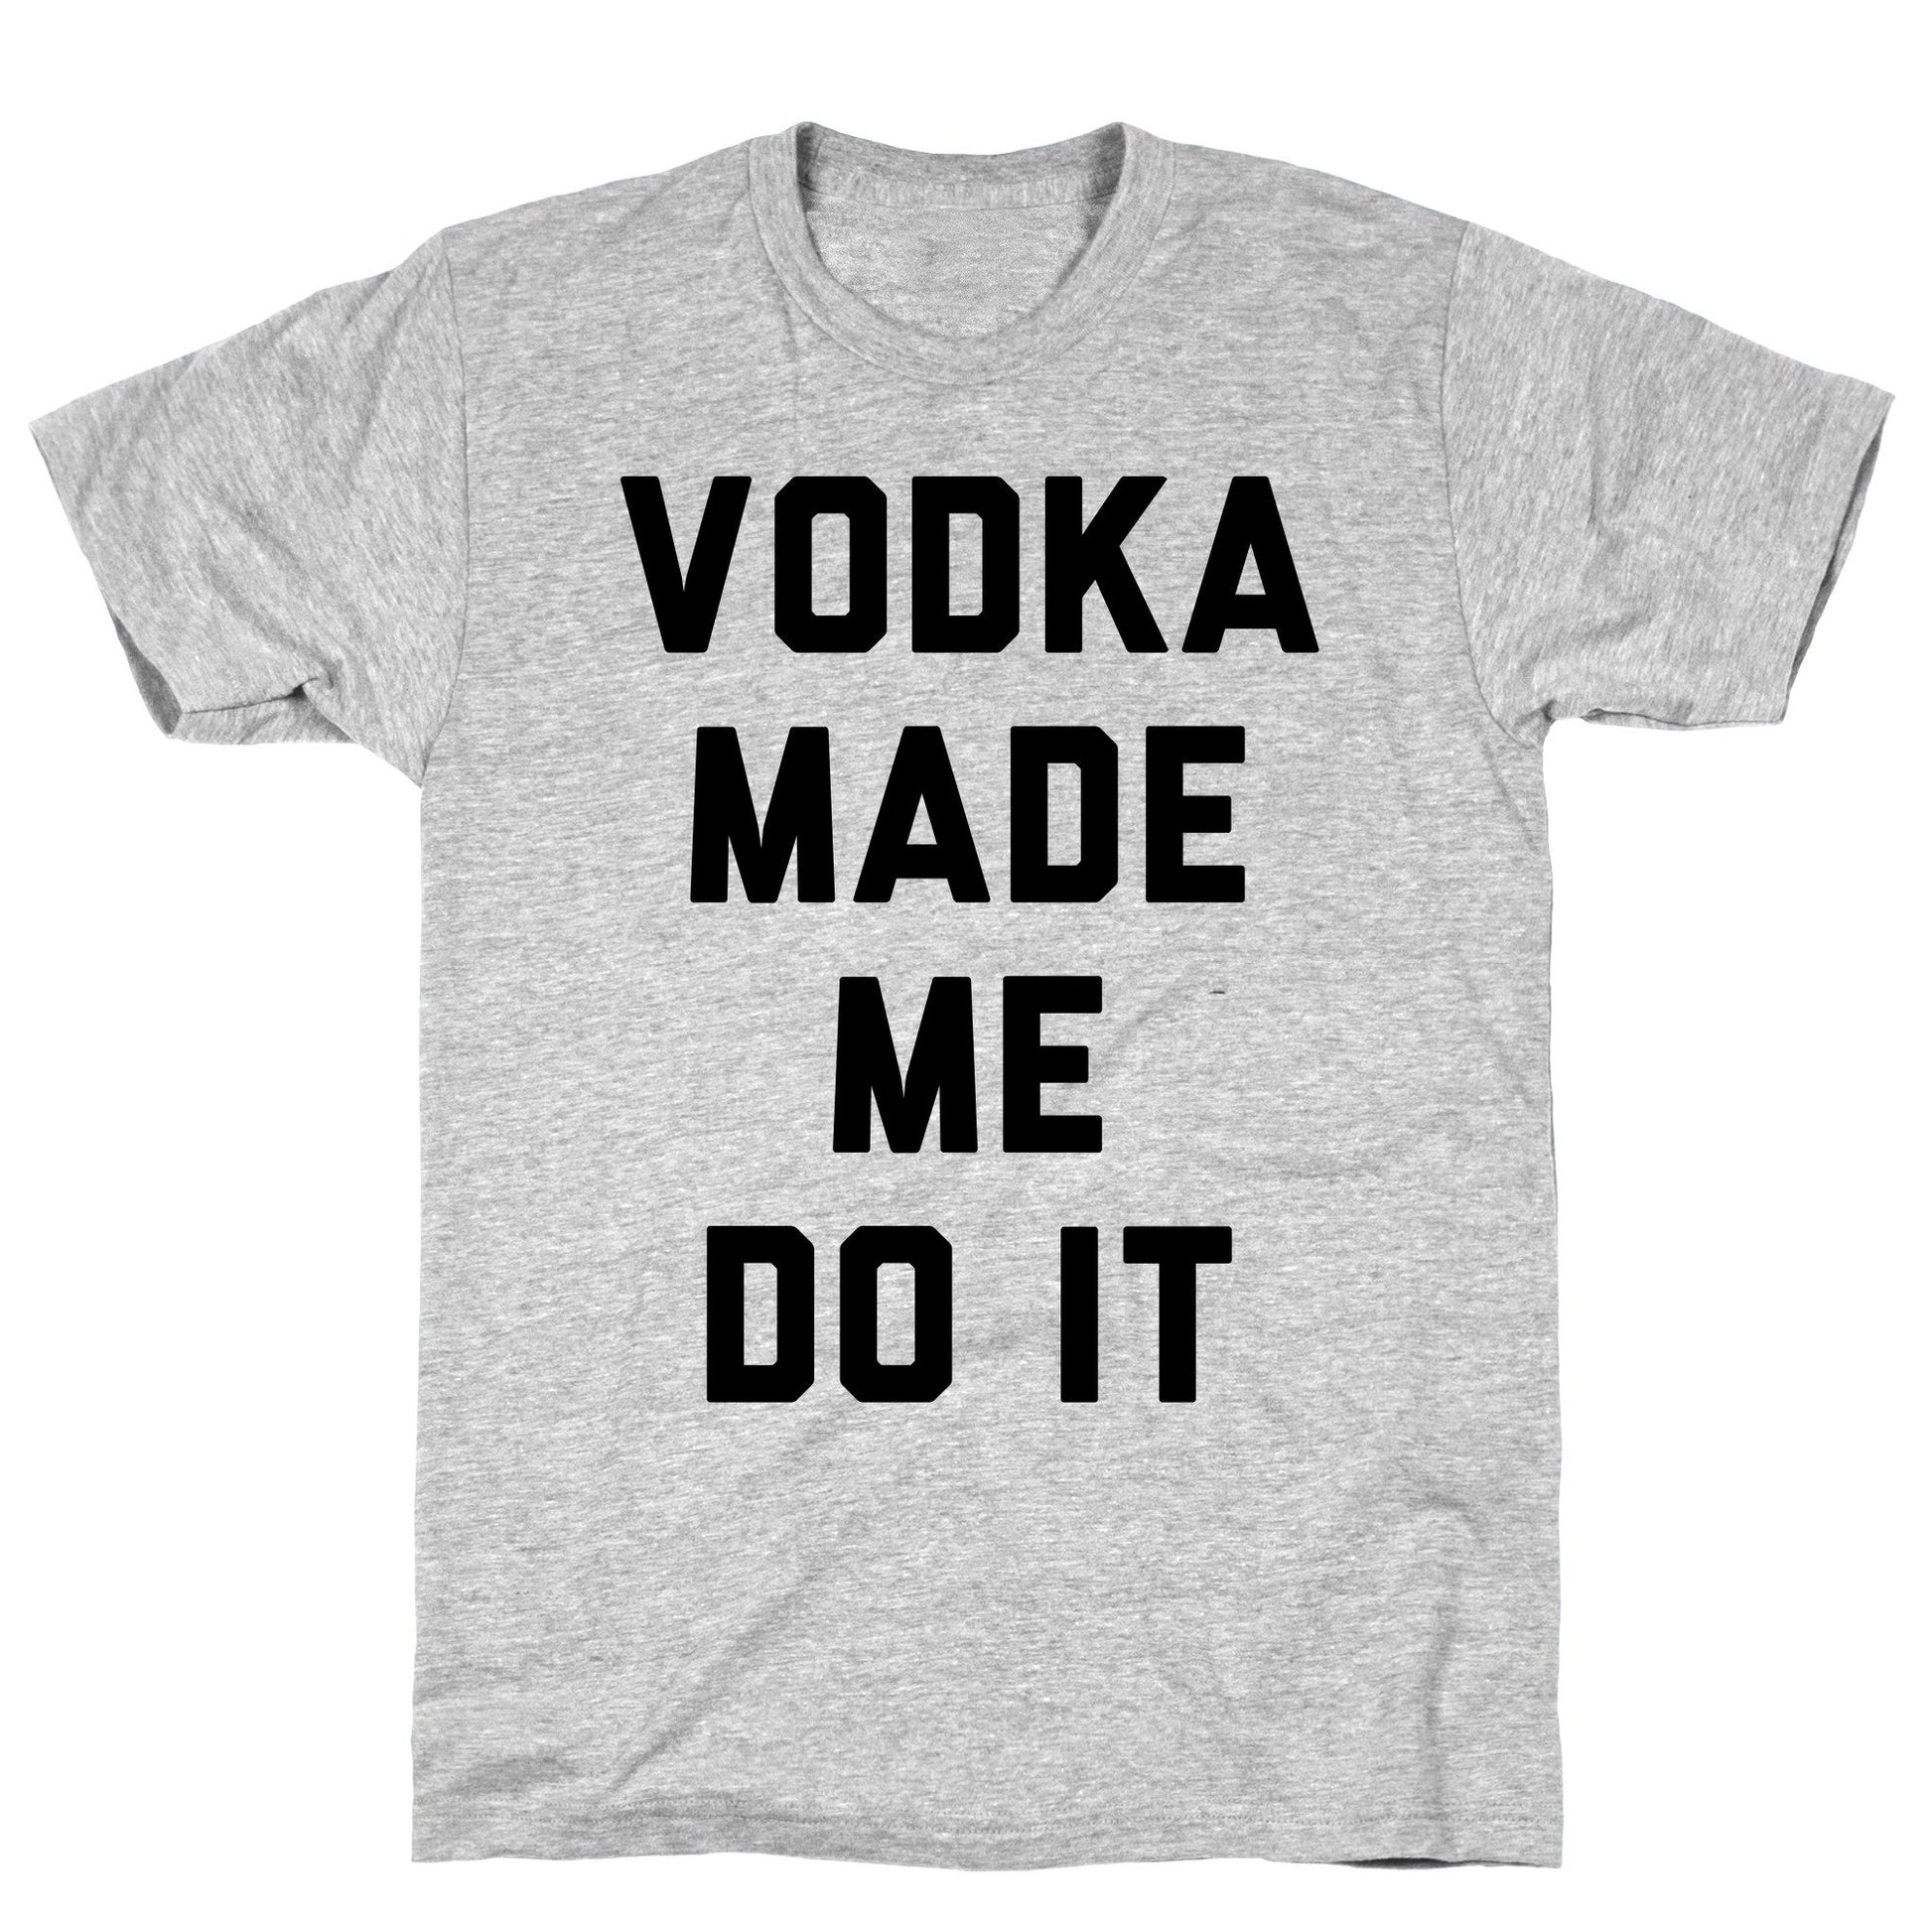 Vodka Made Me Do It Athletic Gray Unisex Cotton Tee by LookHUMAN Flower Power Packages 